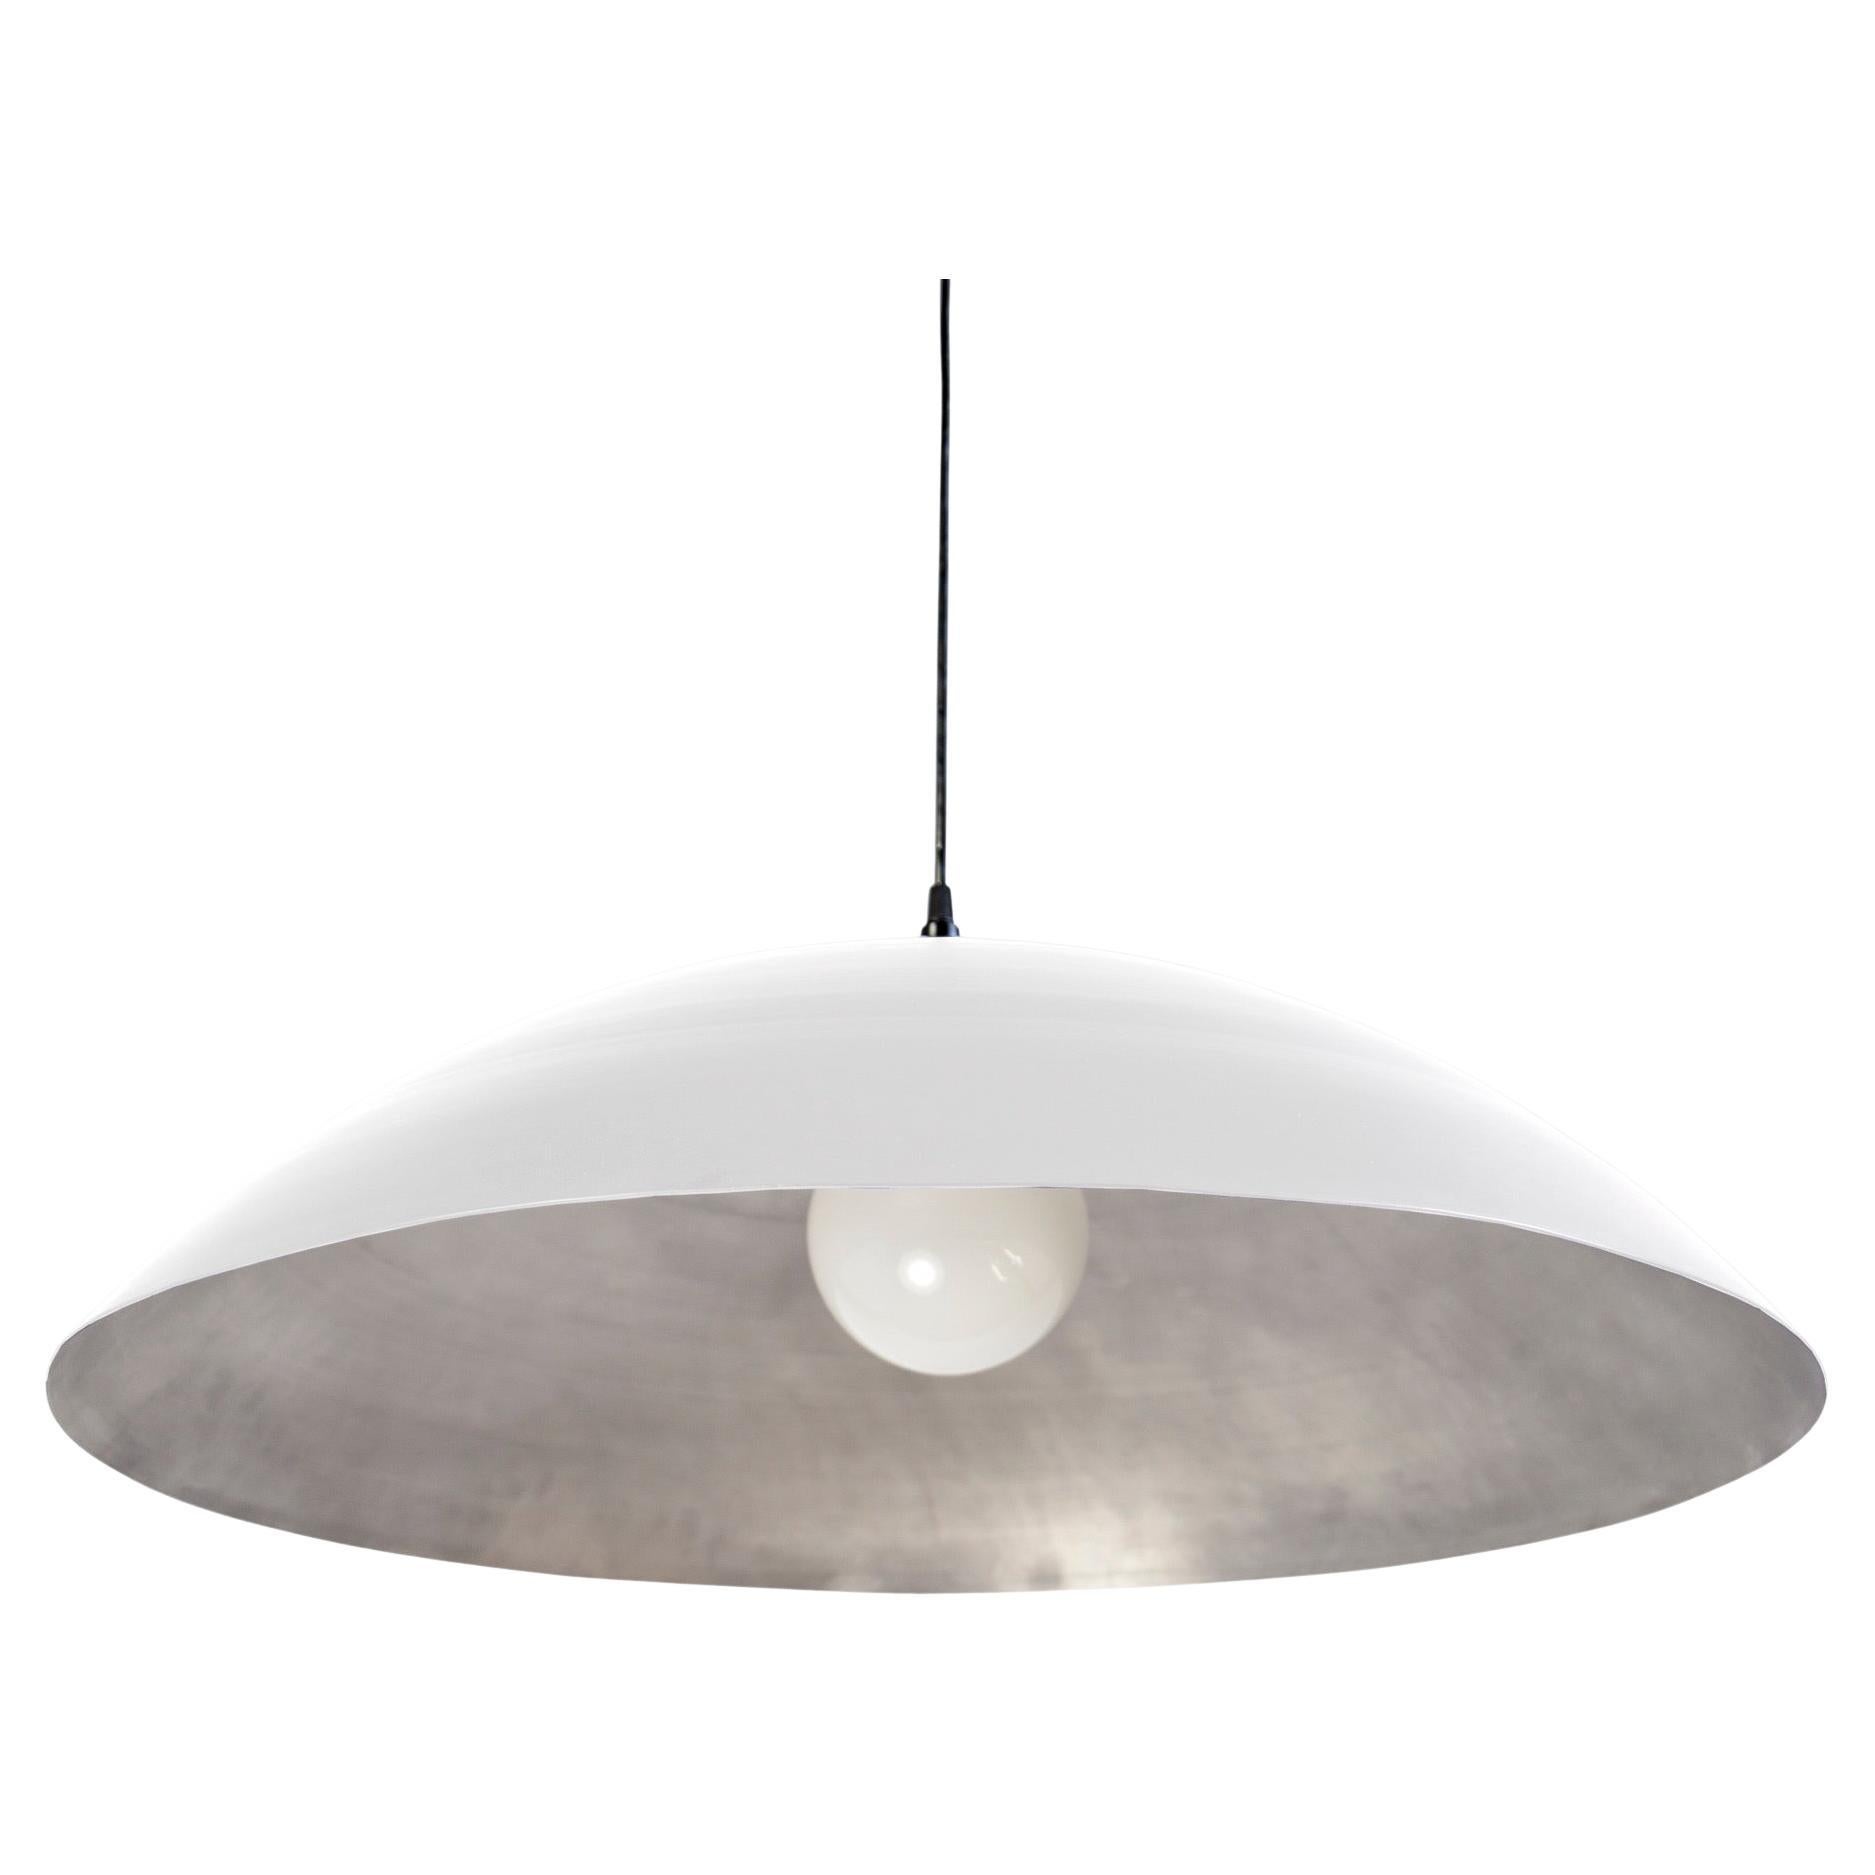 Customizable Oversized Pendant by RESEARCH Lighting, White & Waxed Aluminum, MTO